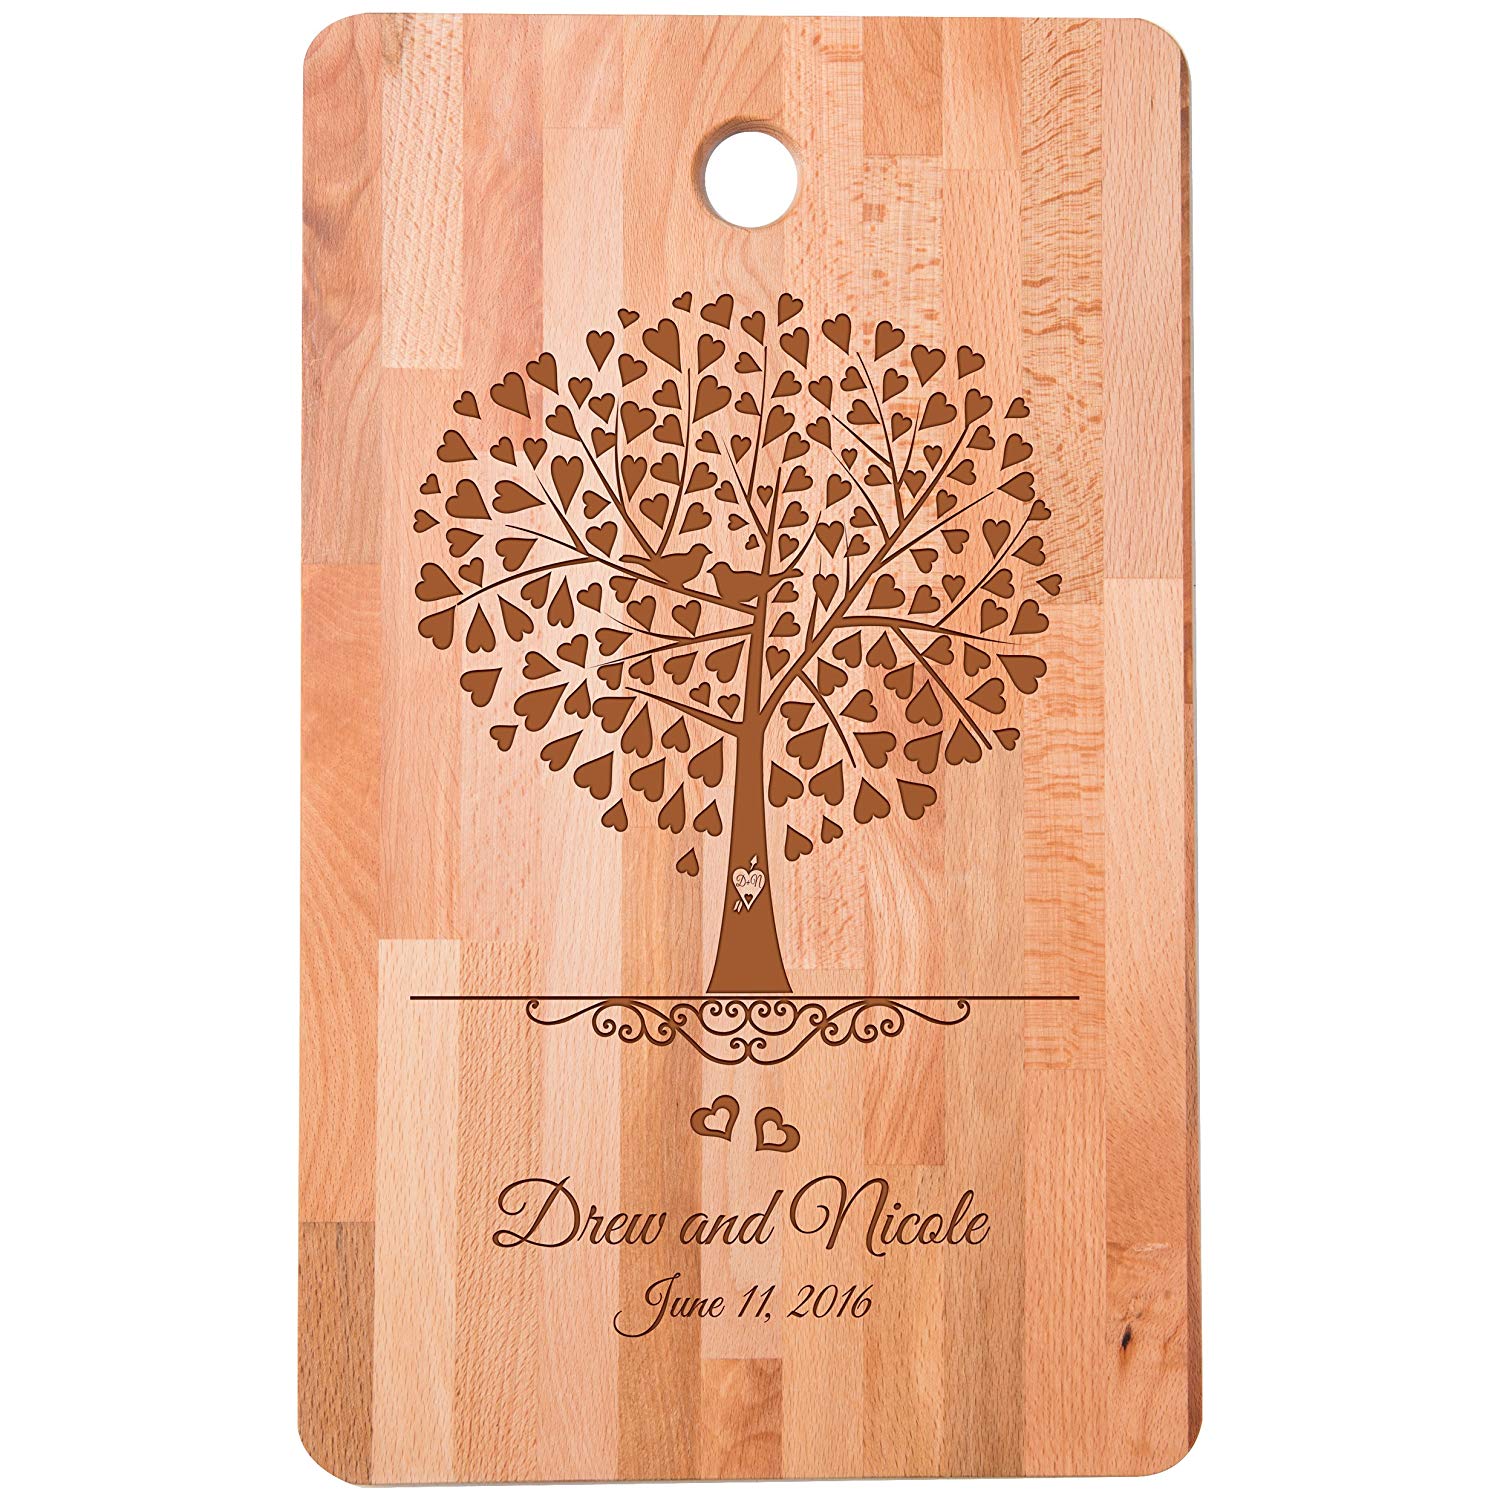 Personalized bamboo Wedding Cutting Board Gift - Established Date - LifeSong Milestones